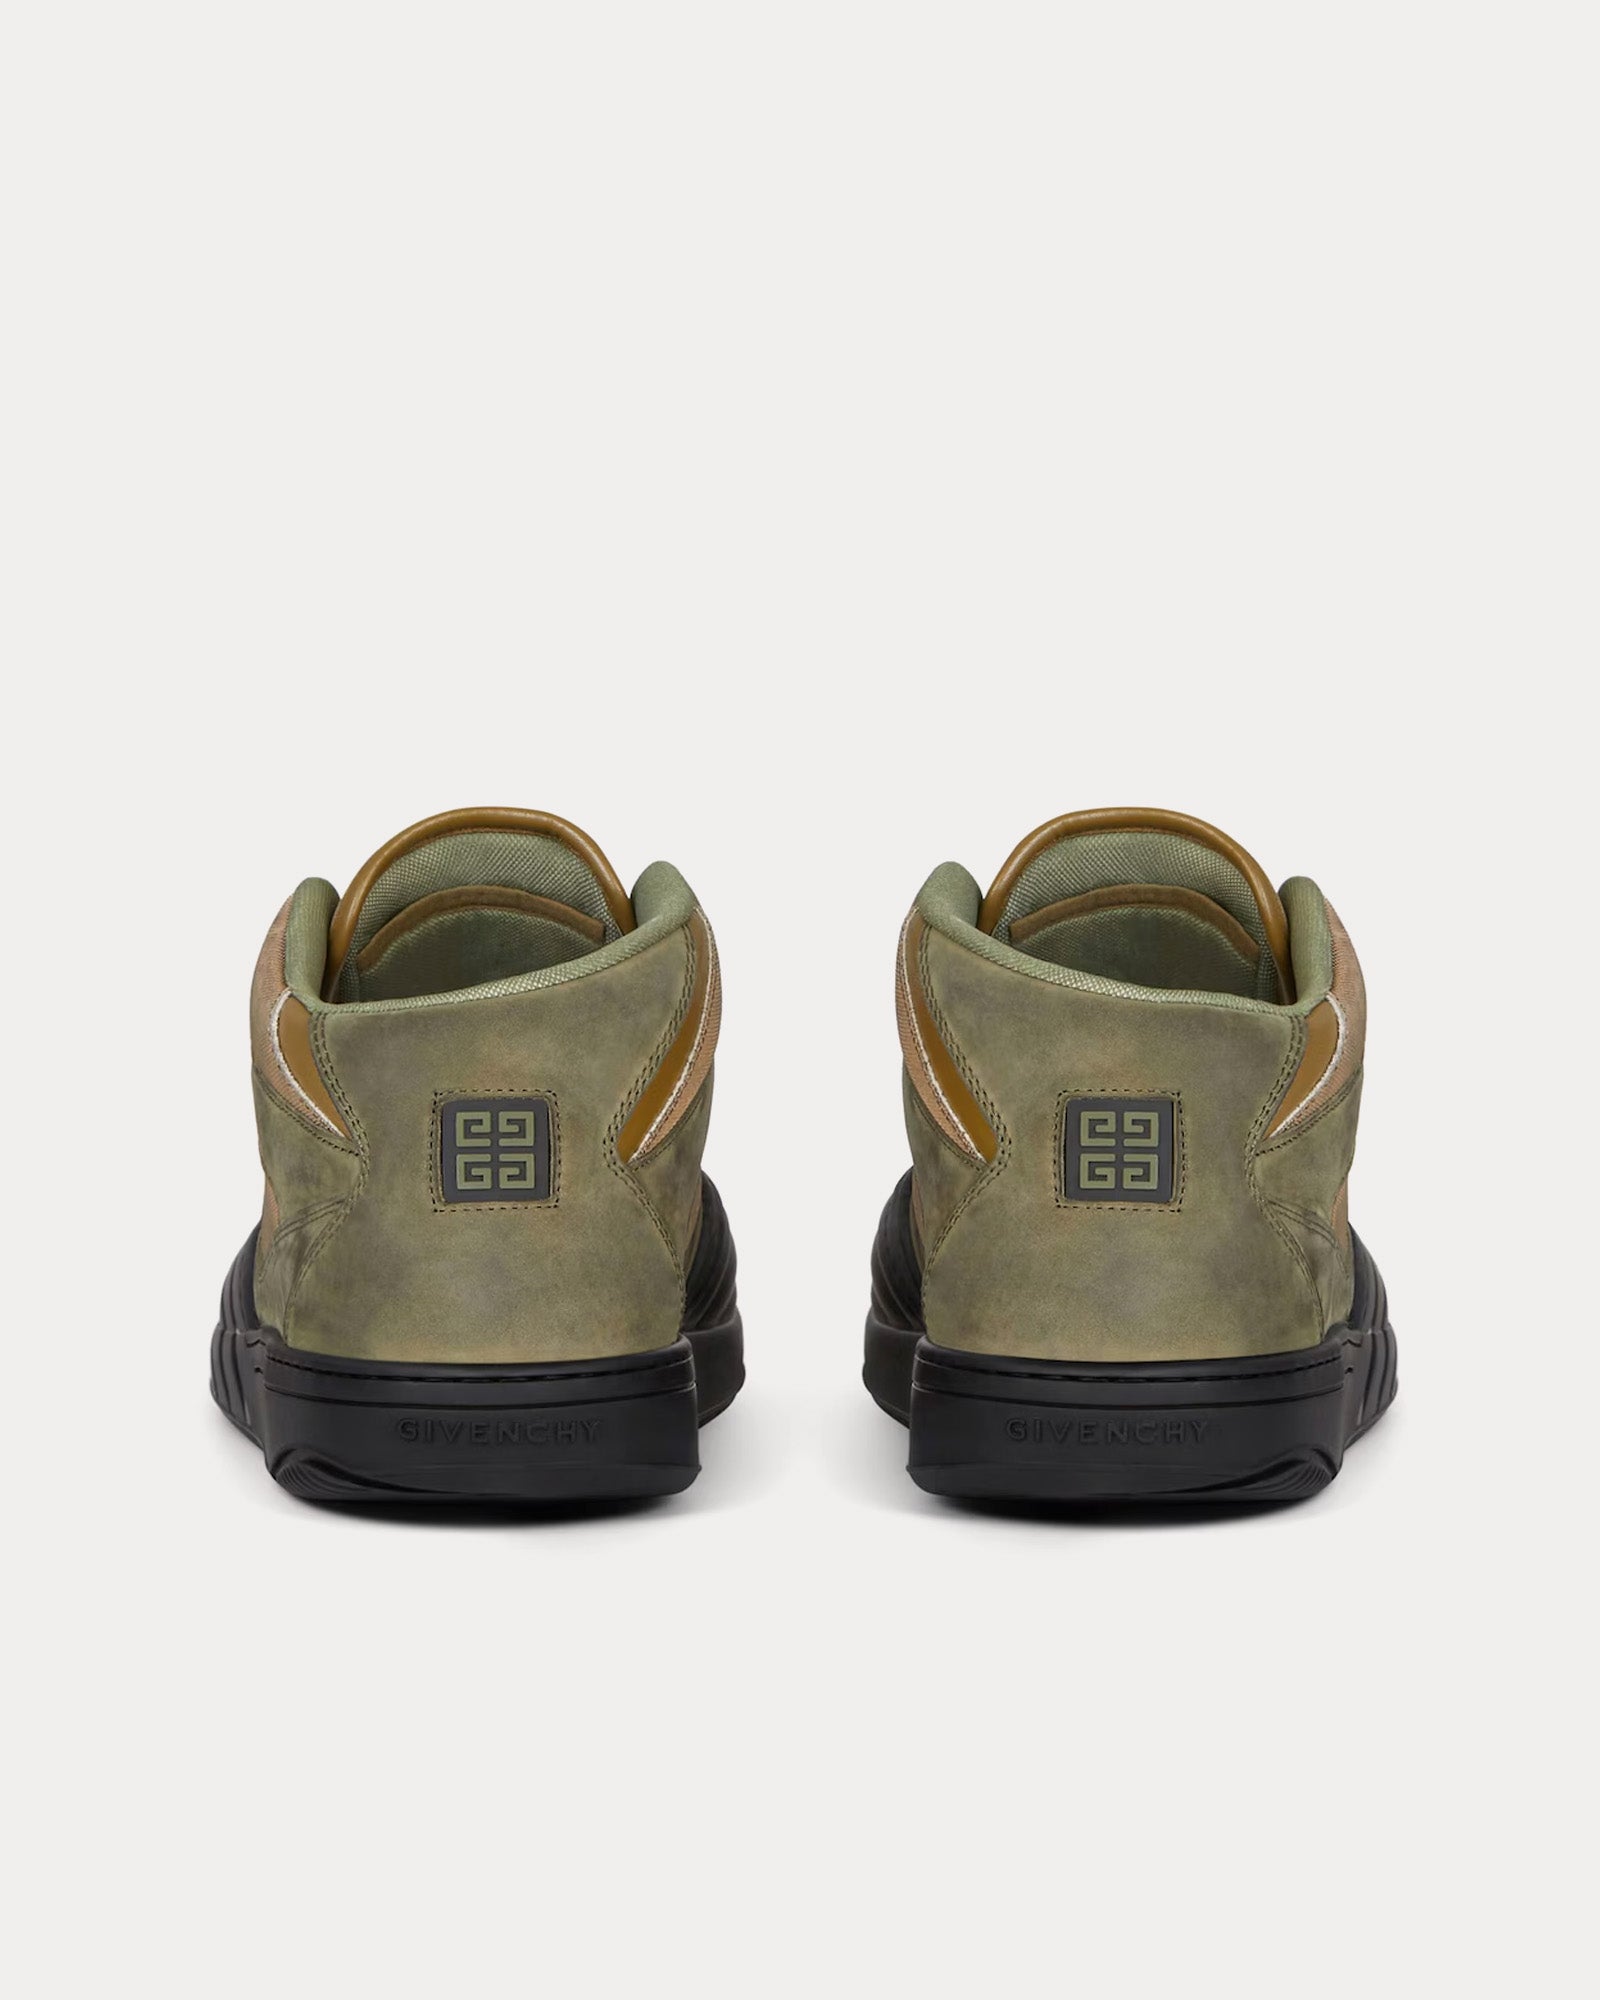 Givenchy - Skate Nubuck & Synthetic Fiber Olive Green Mid Top Sneakers